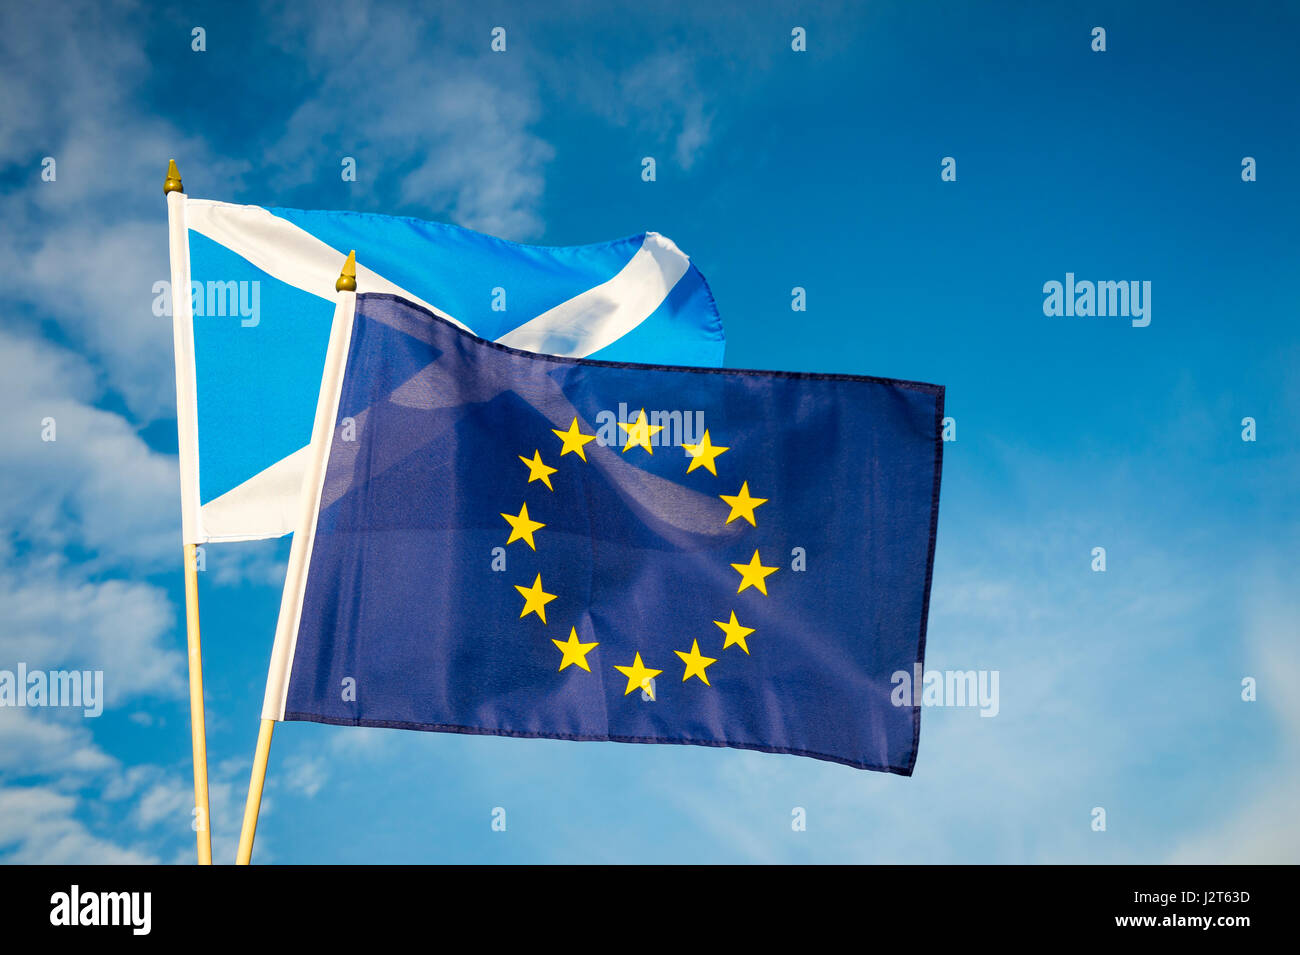 EU European Union and Scottish flag flying together in bright blue sky Stock Photo